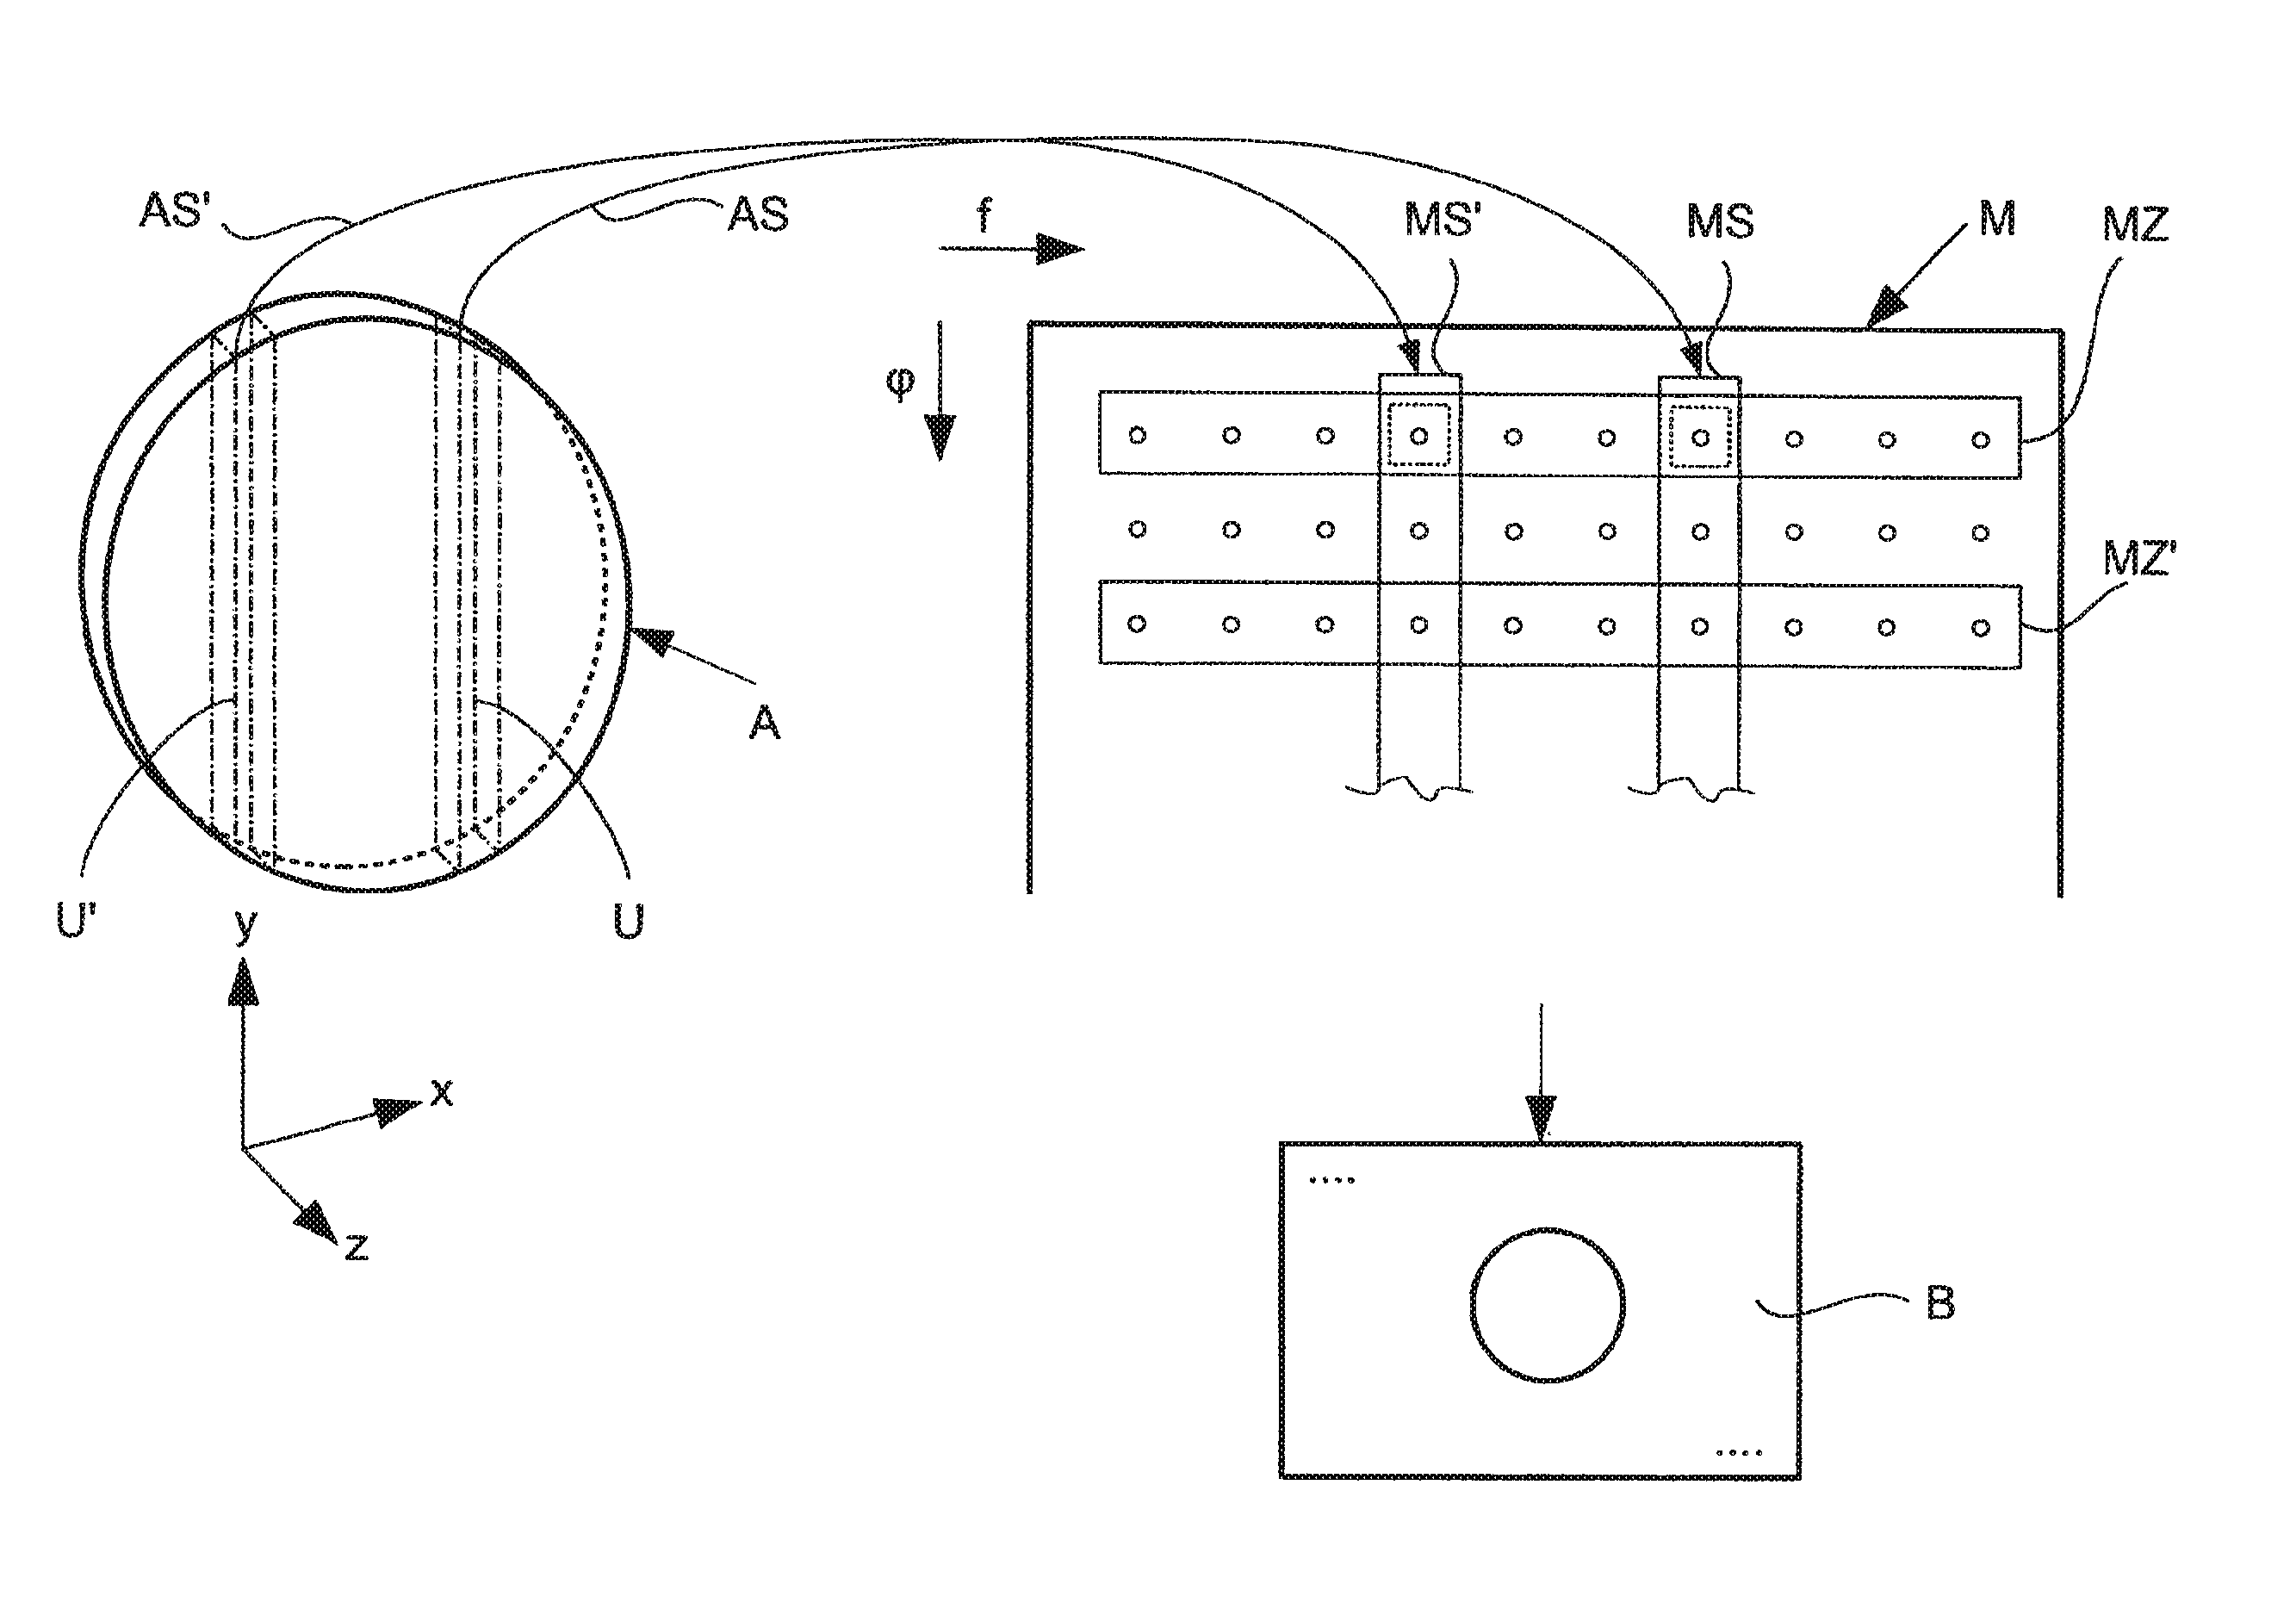 Magnetic resonance imaging apparatus, evaluation device, and method